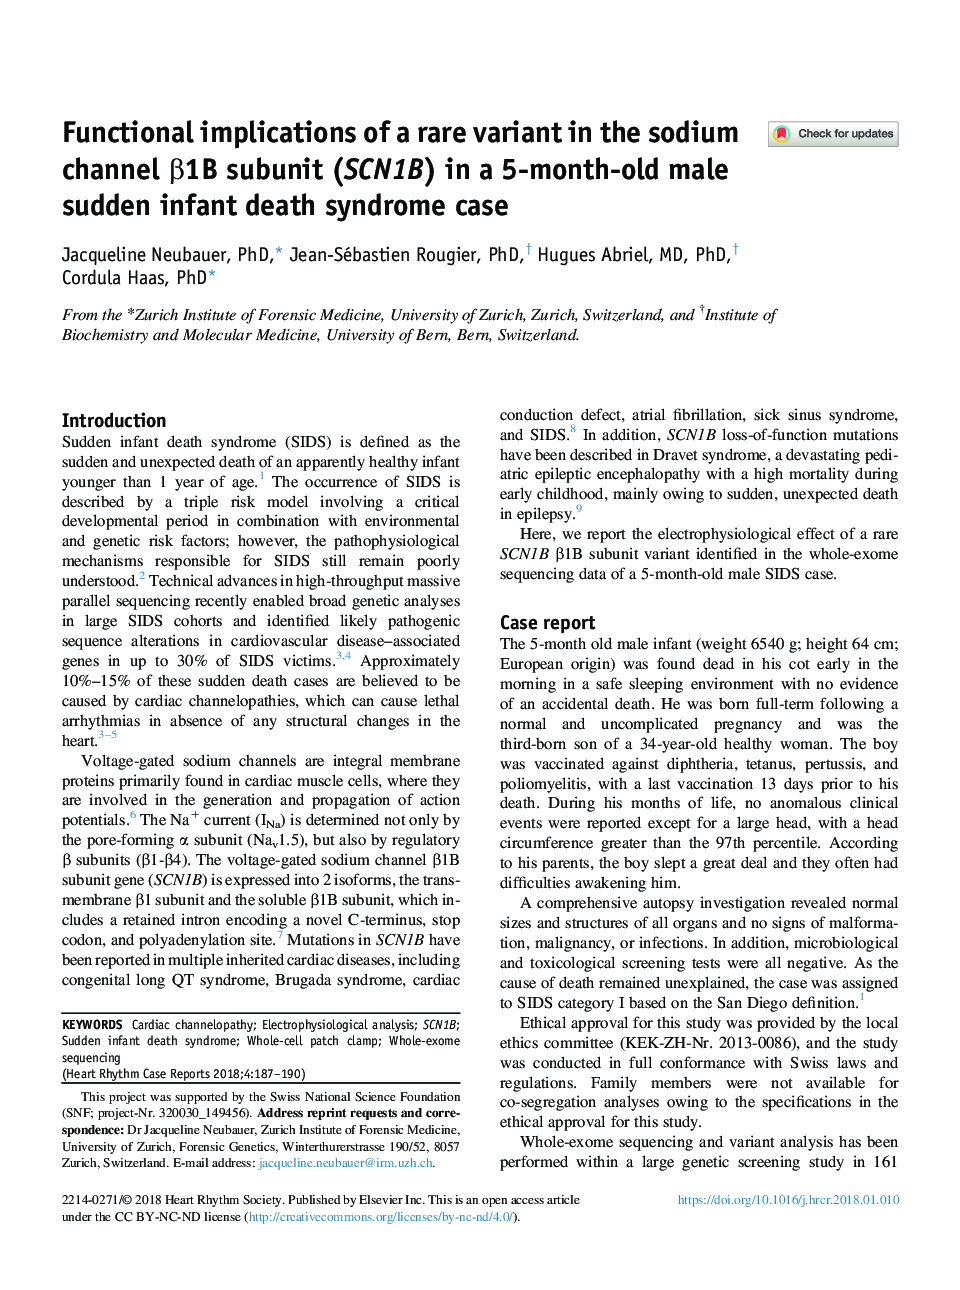 Functional implications of a rare variant in the sodium channel Î²1B subunit (SCN1B) in a 5-month-old male sudden infant death syndrome case